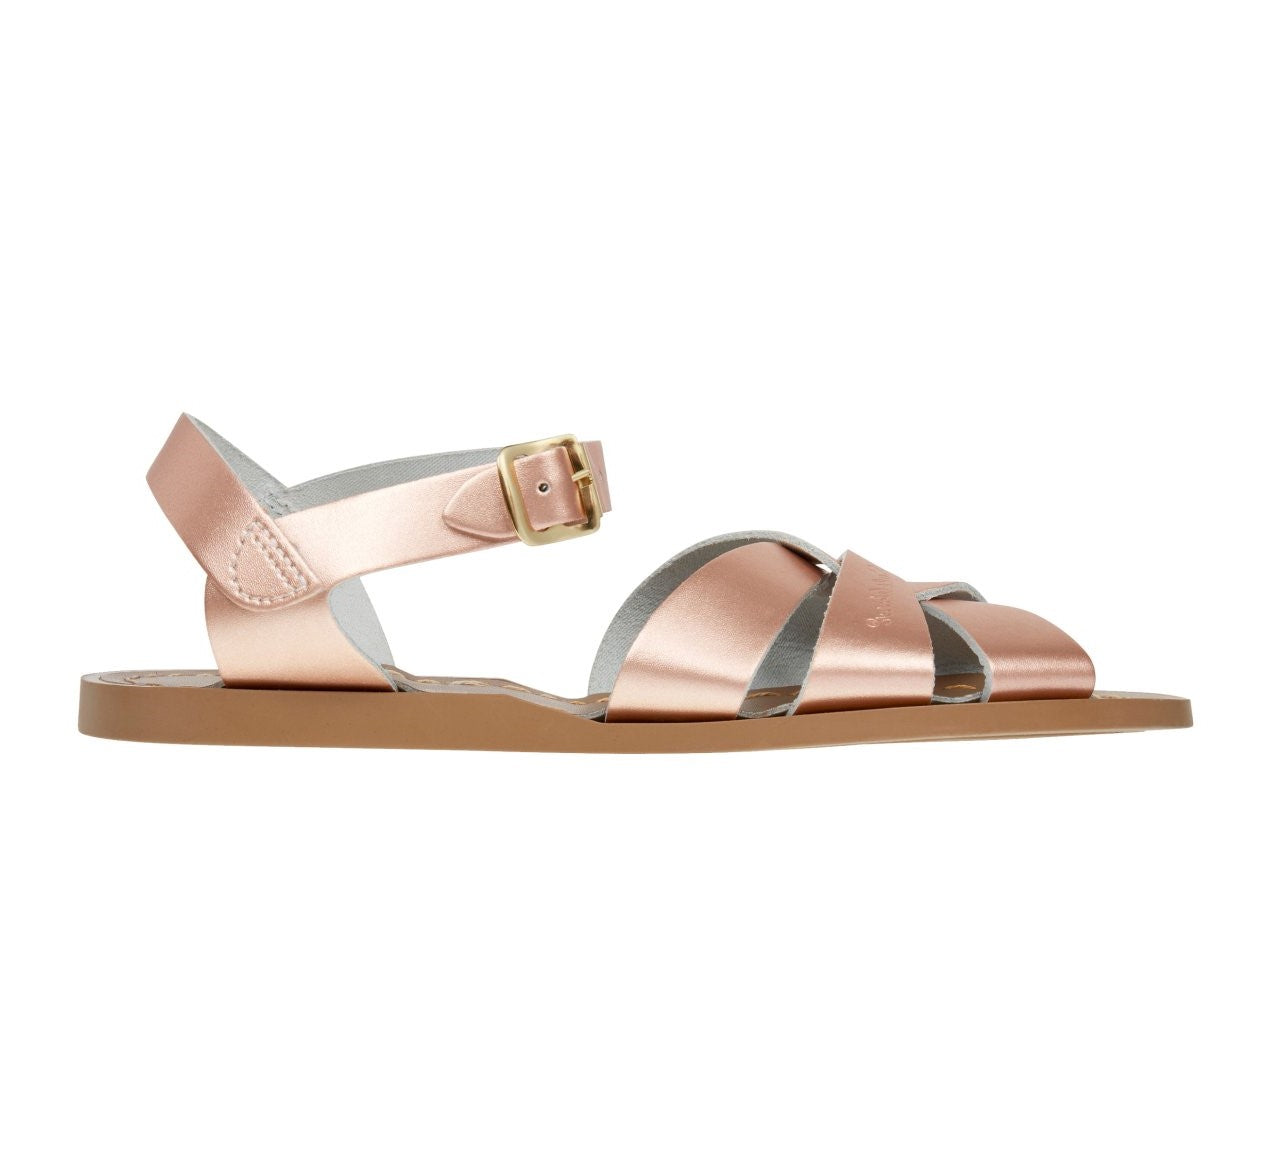 An original girls sandal by Salt Water Sandals in rose gold with single buckle fastening around the ankle. Open Toe and Sling-back with woven detail on the front. Right side view.